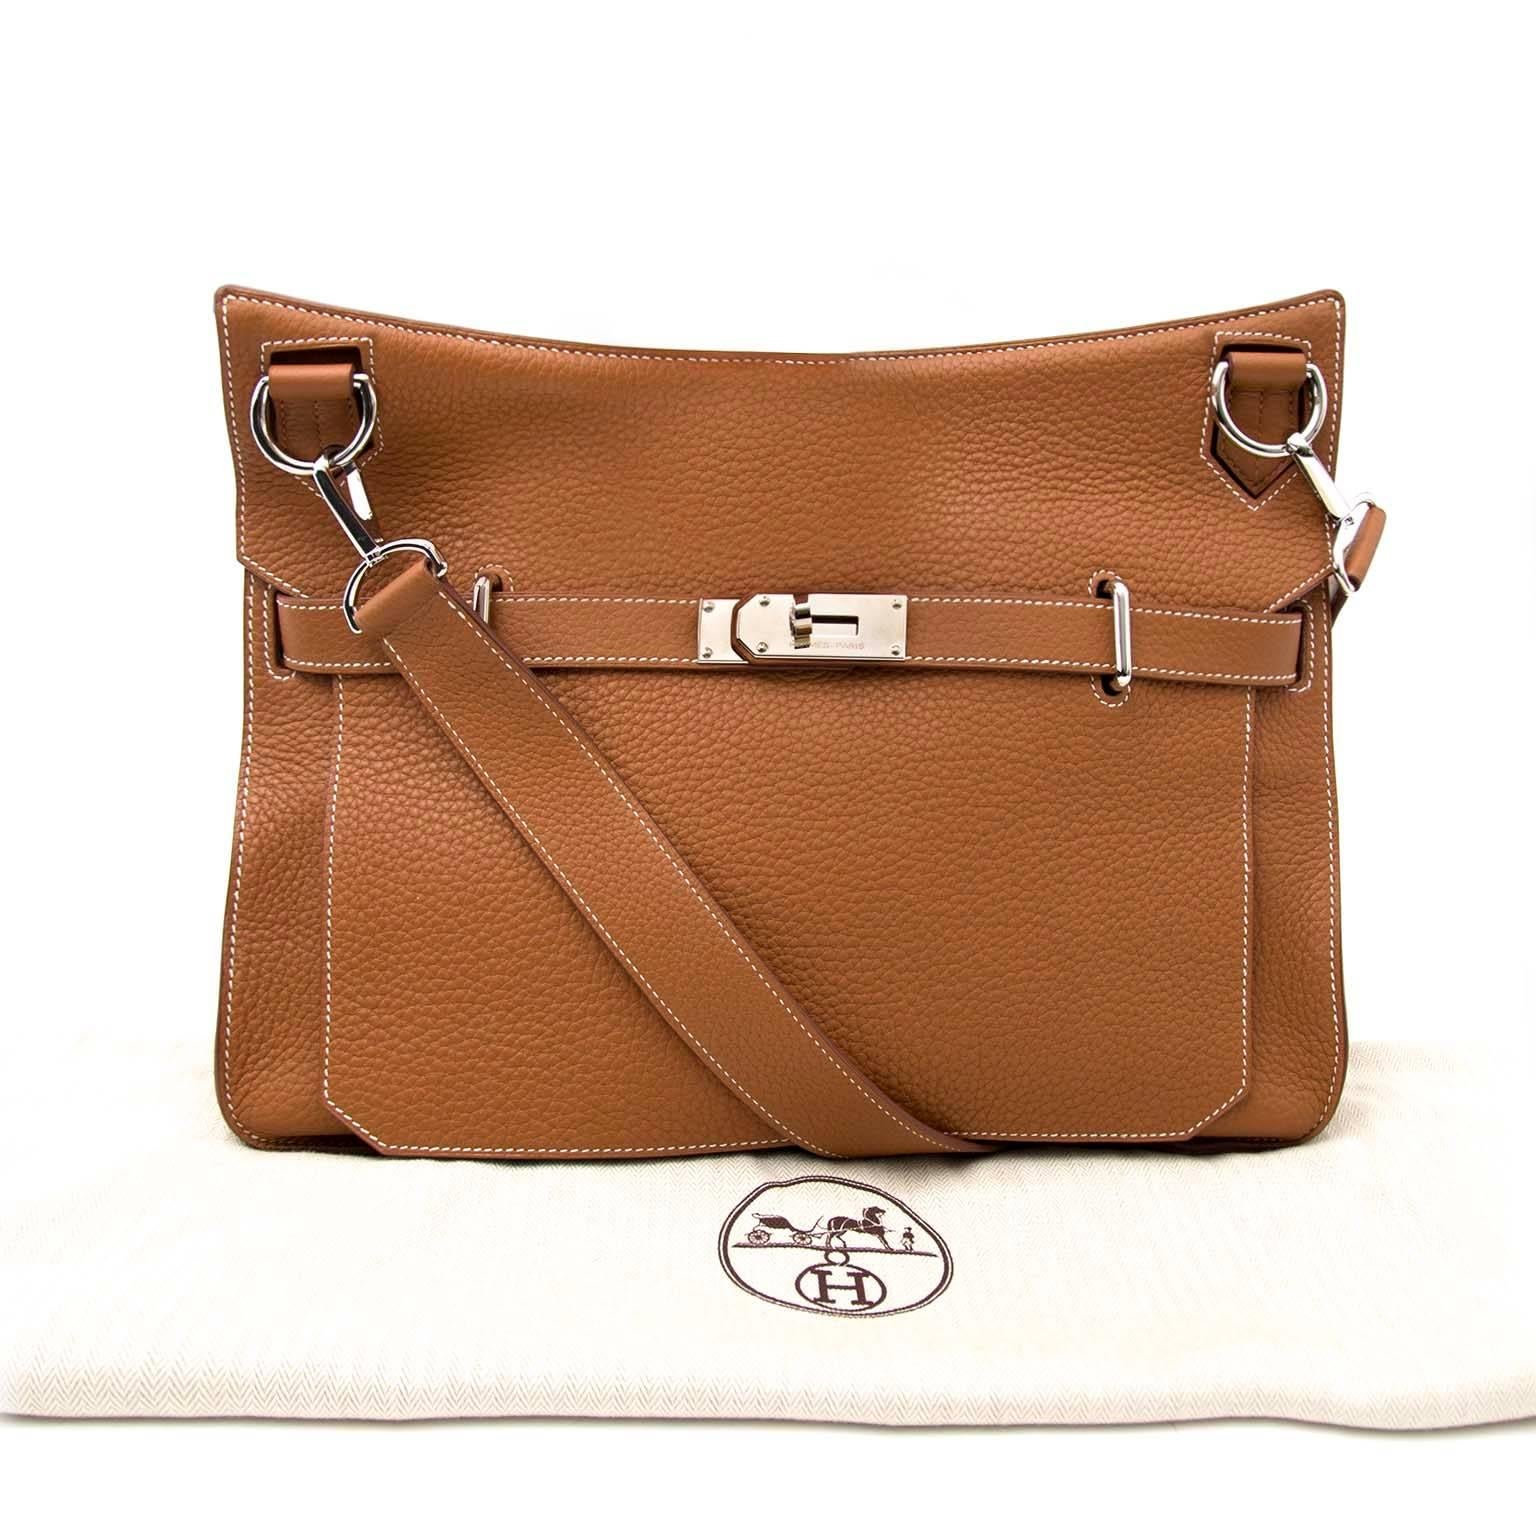 Excellent condition

Estimated retail price: 6200 euro 

Hermès Jypsiere 37 Brown 

Contains all features of a messenger bag, while still looking chic. 

The Hermès Jypsiere shoulder bag can be worn on the shoulder or accross the body, so it's easy